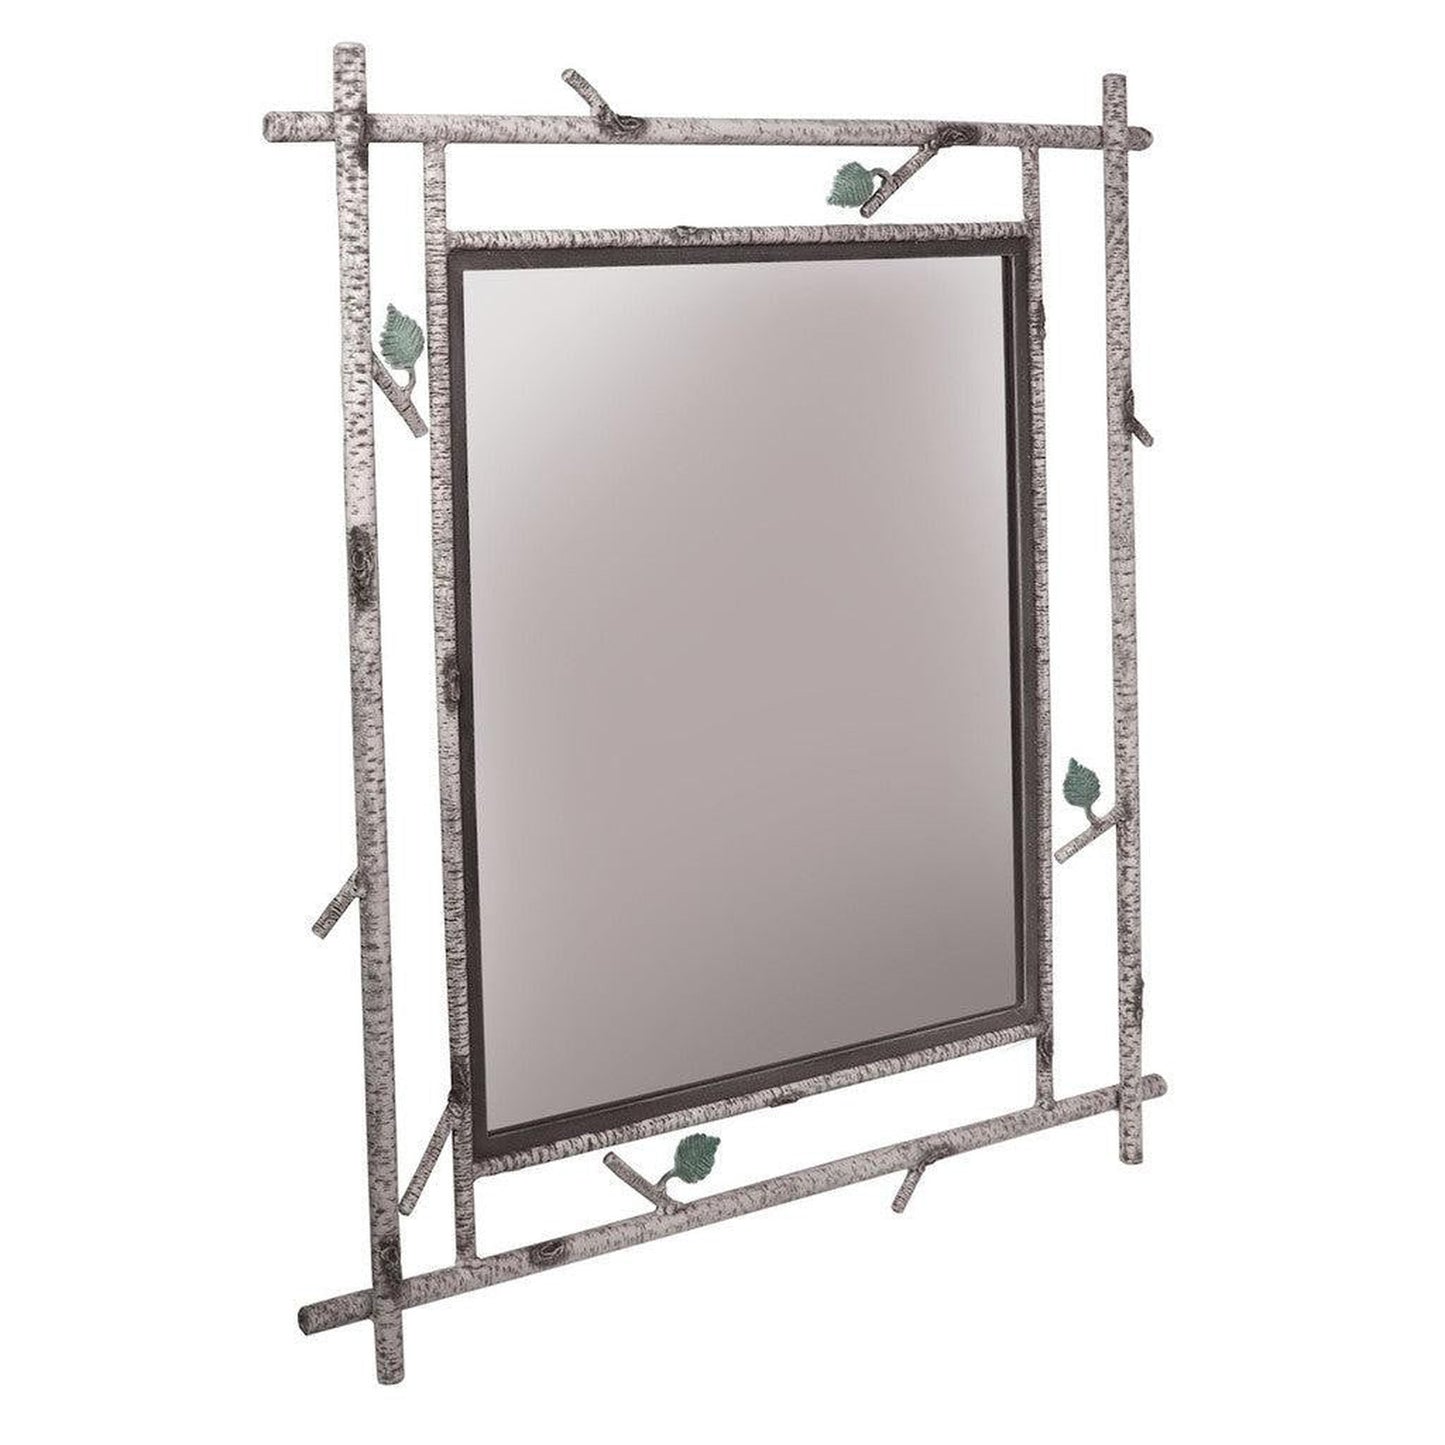 Stone County Ironworks Whisper Creek 35" x 47" Large Woodland Brown Iron Wall Mirror With Pewter Iron Accent